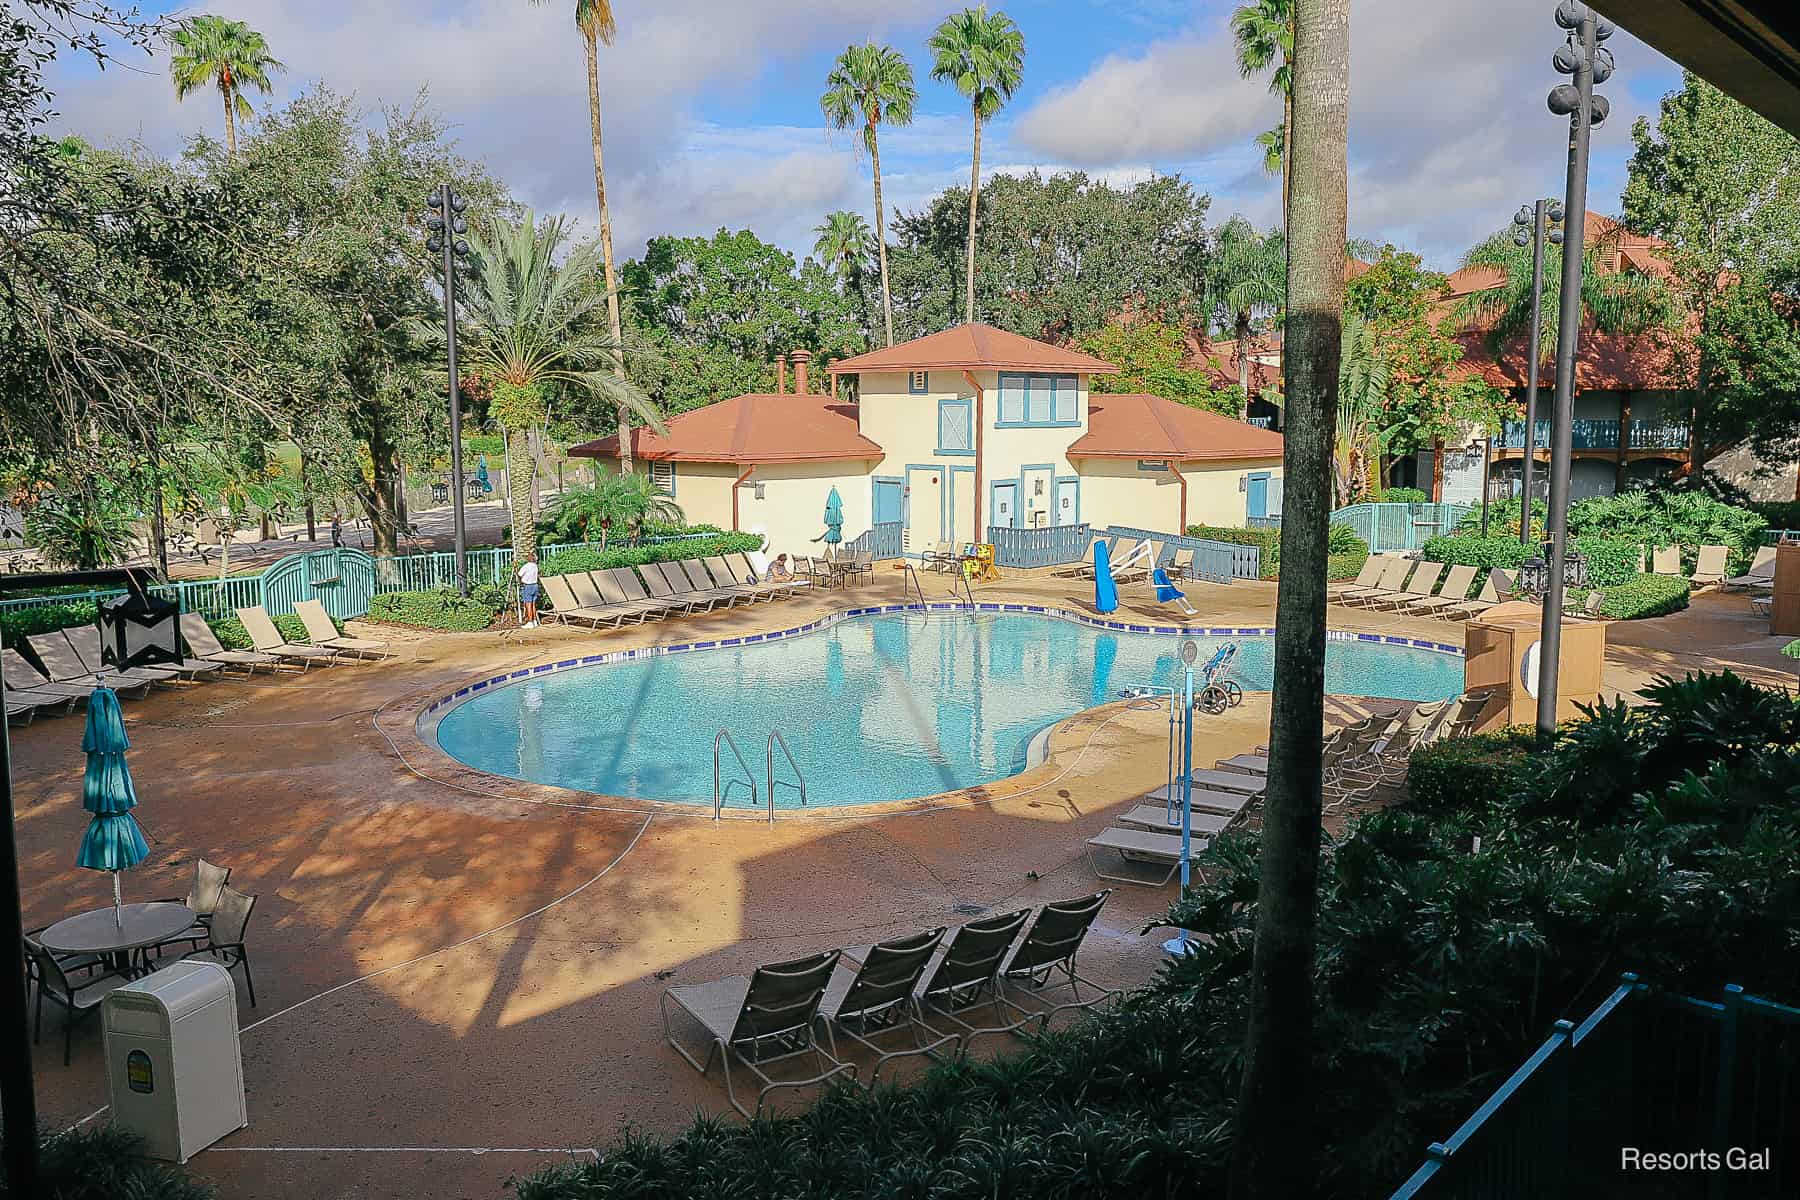 a view of the Cabanas pool area from the second floor of the village 